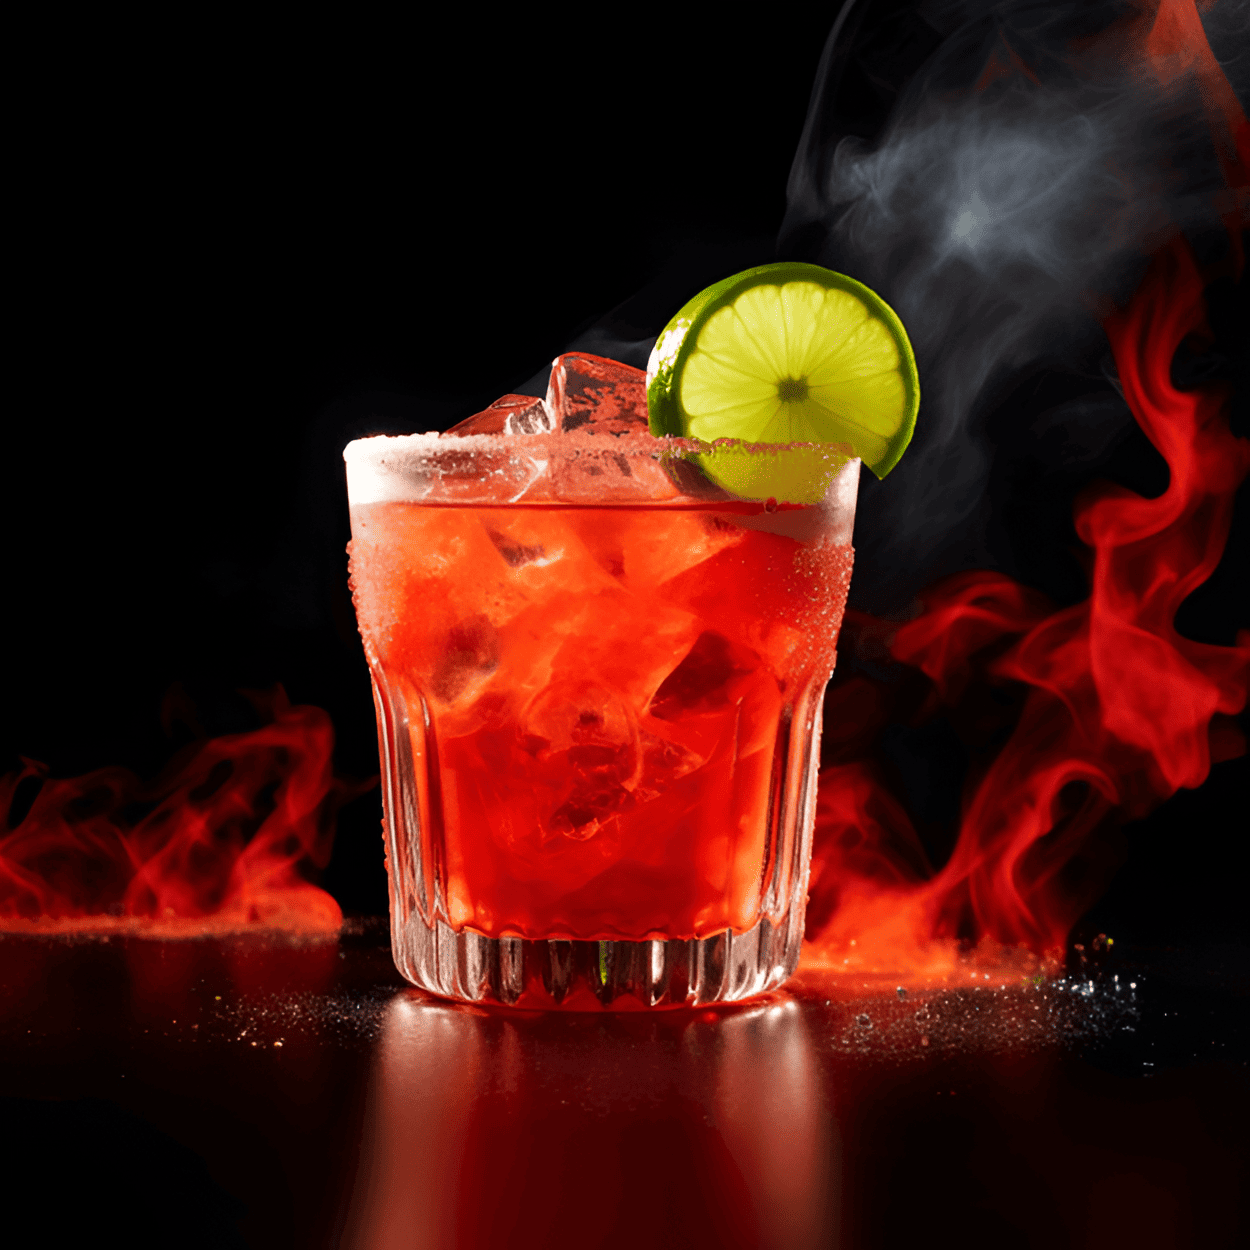 The Snake Venom cocktail is a strong, fiery, and robust drink. It has a potent kick that hits you right from the first sip. The taste is a complex blend of sweet, sour, and spicy notes, with a strong alcoholic punch that lingers on the palate.